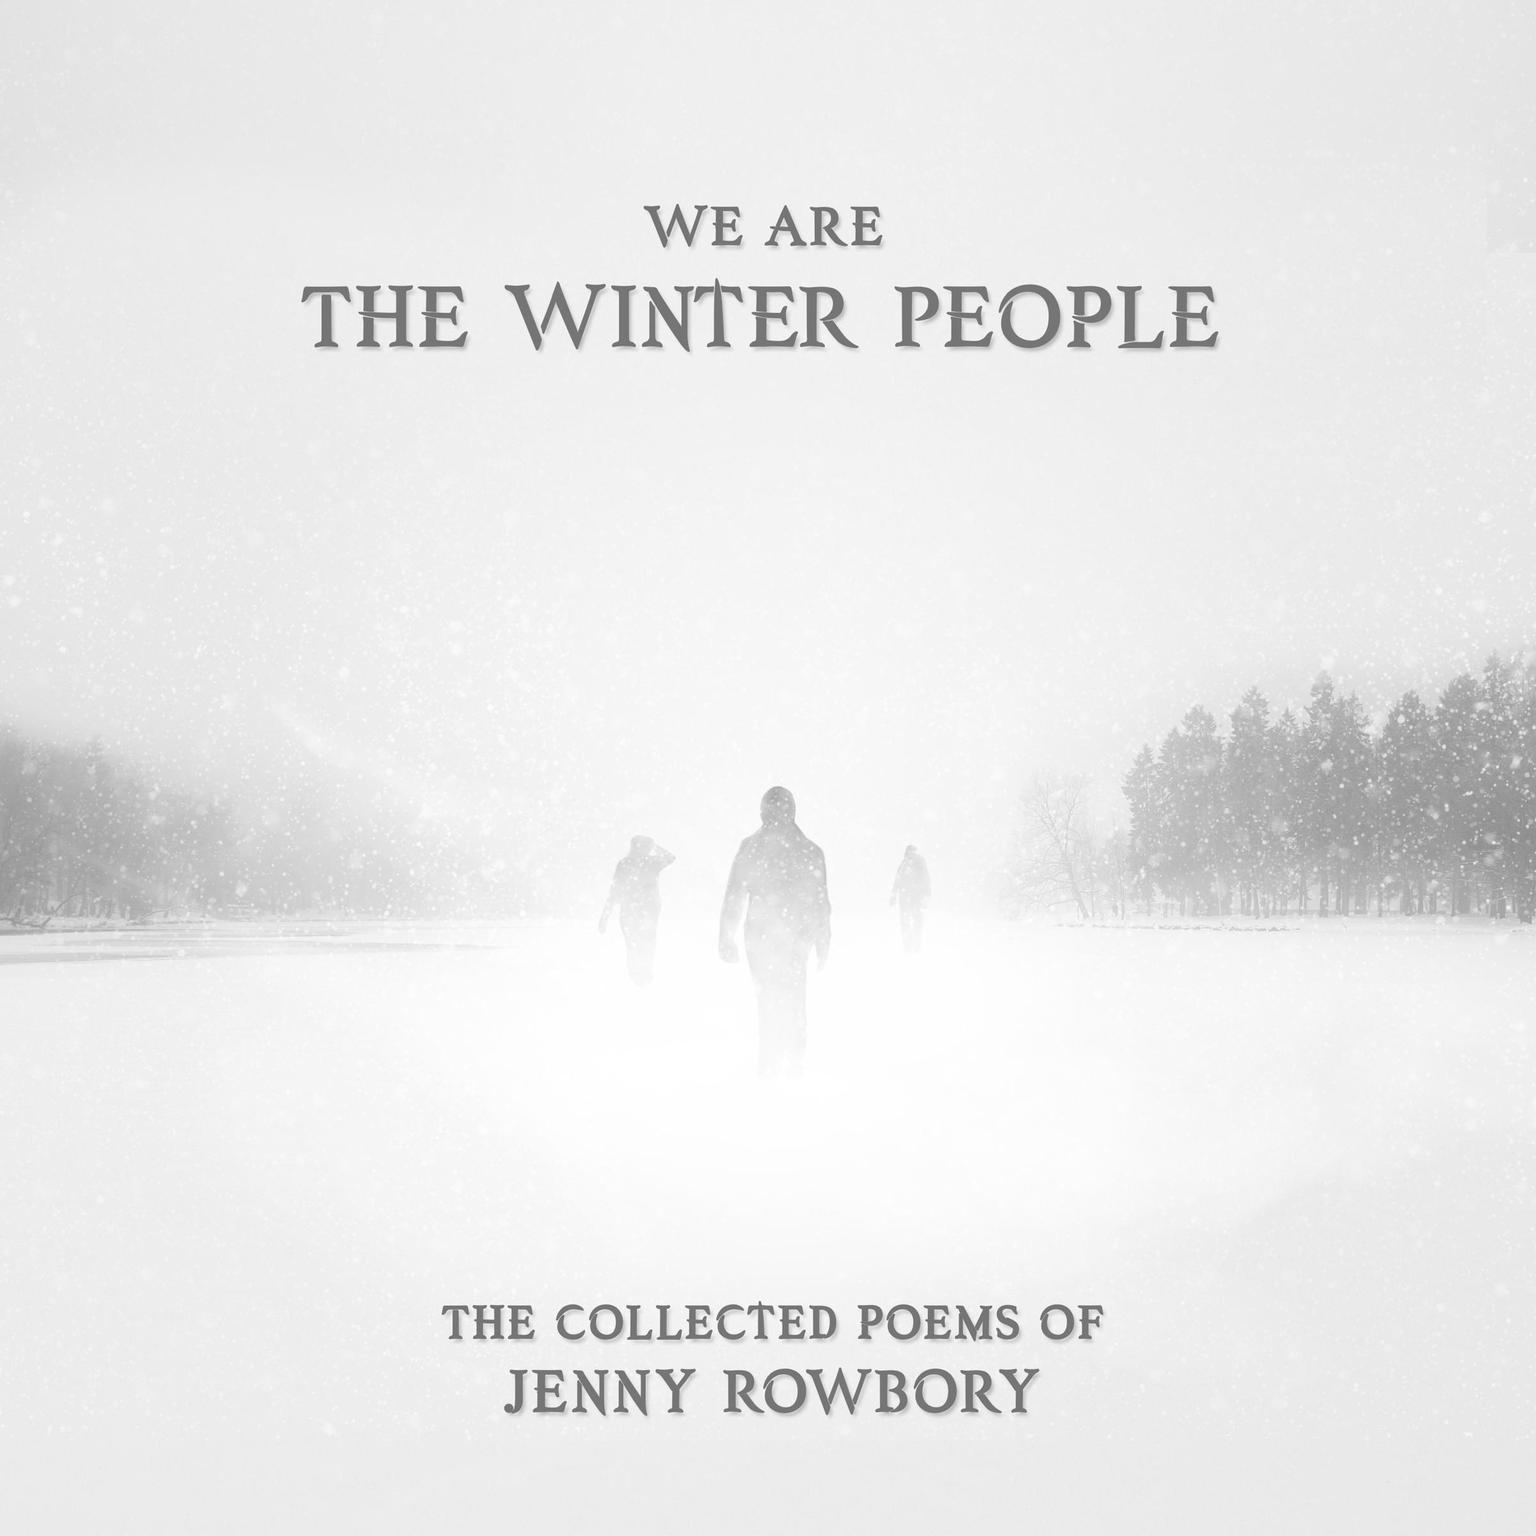 We Are The Winter People: The collected poems of Jenny Rowbory Audiobook, by Jenny Rowbory